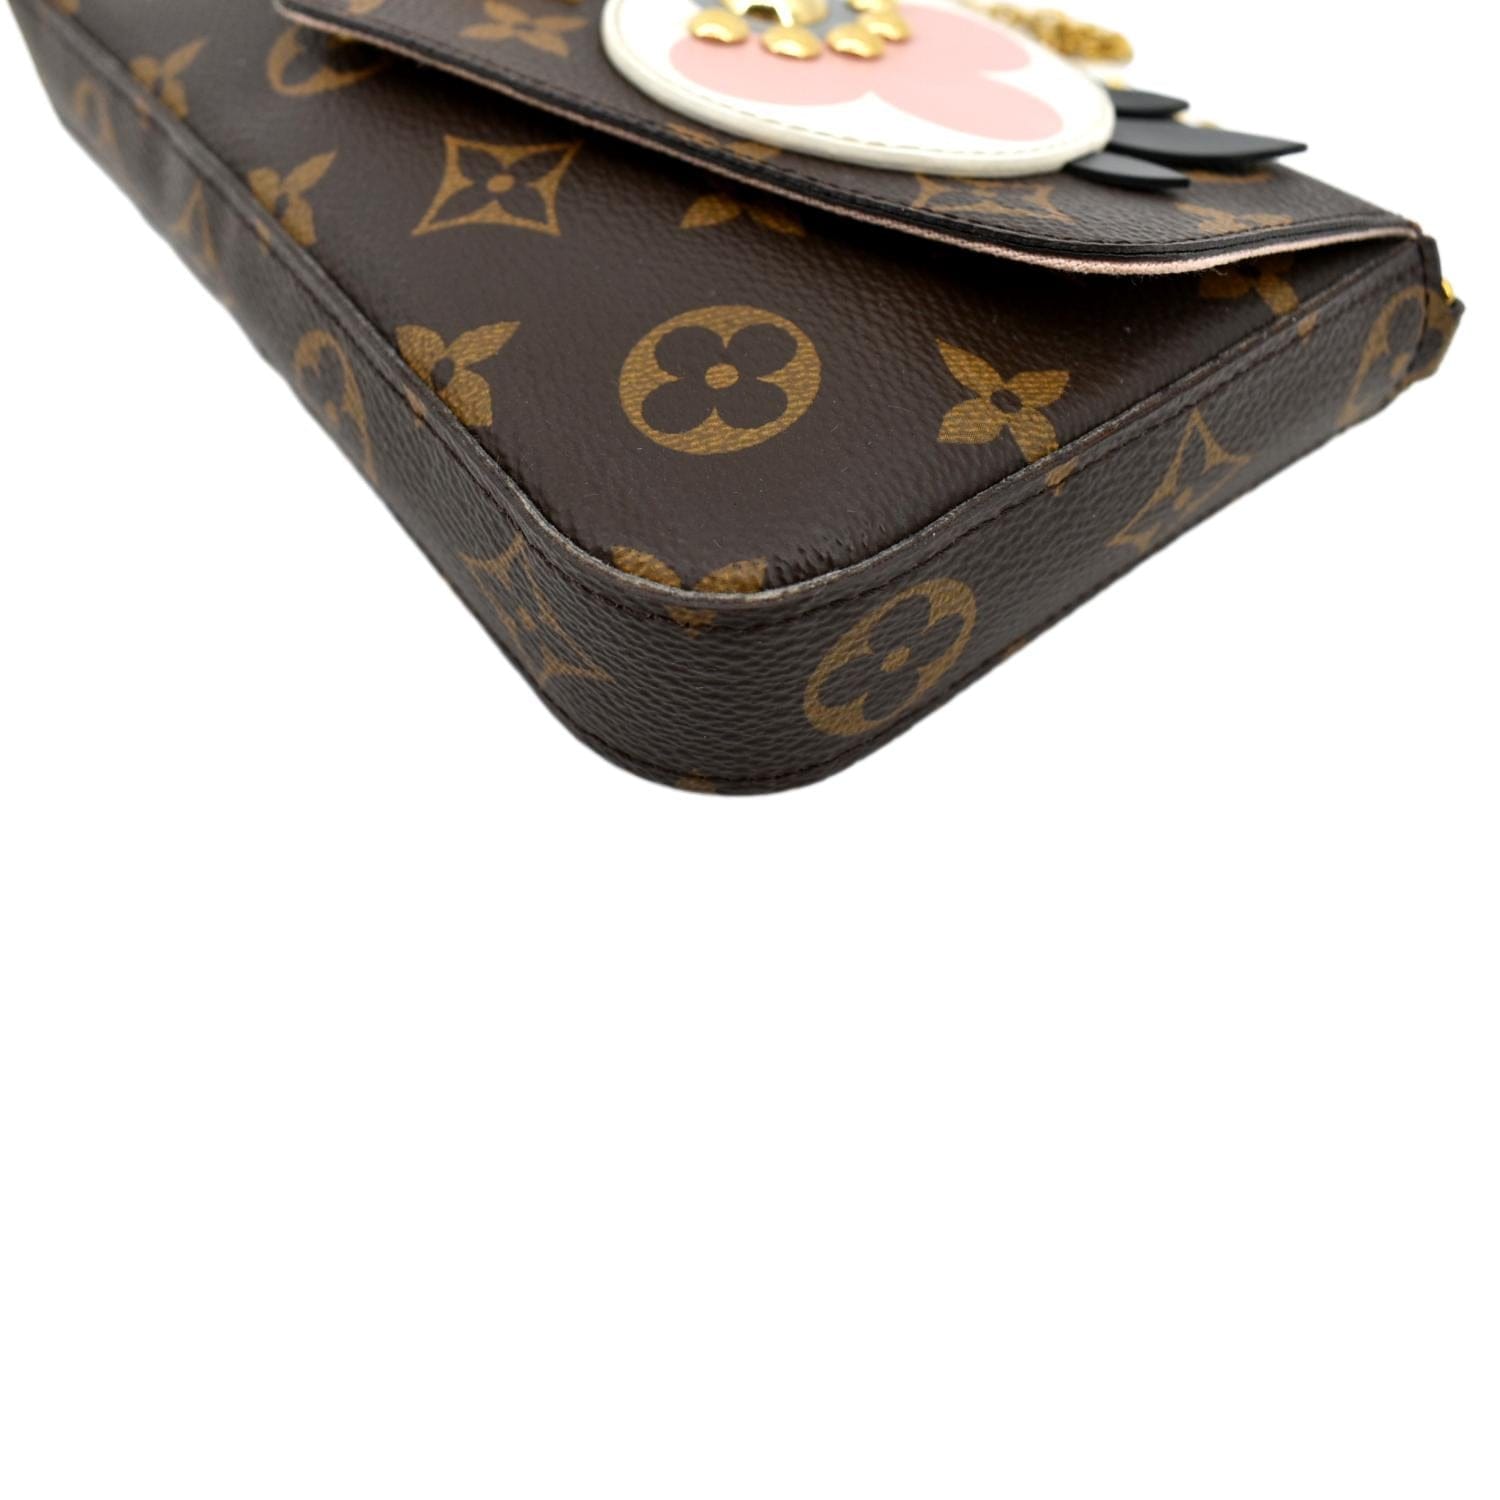 Louis Vuitton Pochette Felicie Owl. Join our Louis Vuitton group where we  share our secret LV obsession! ❤